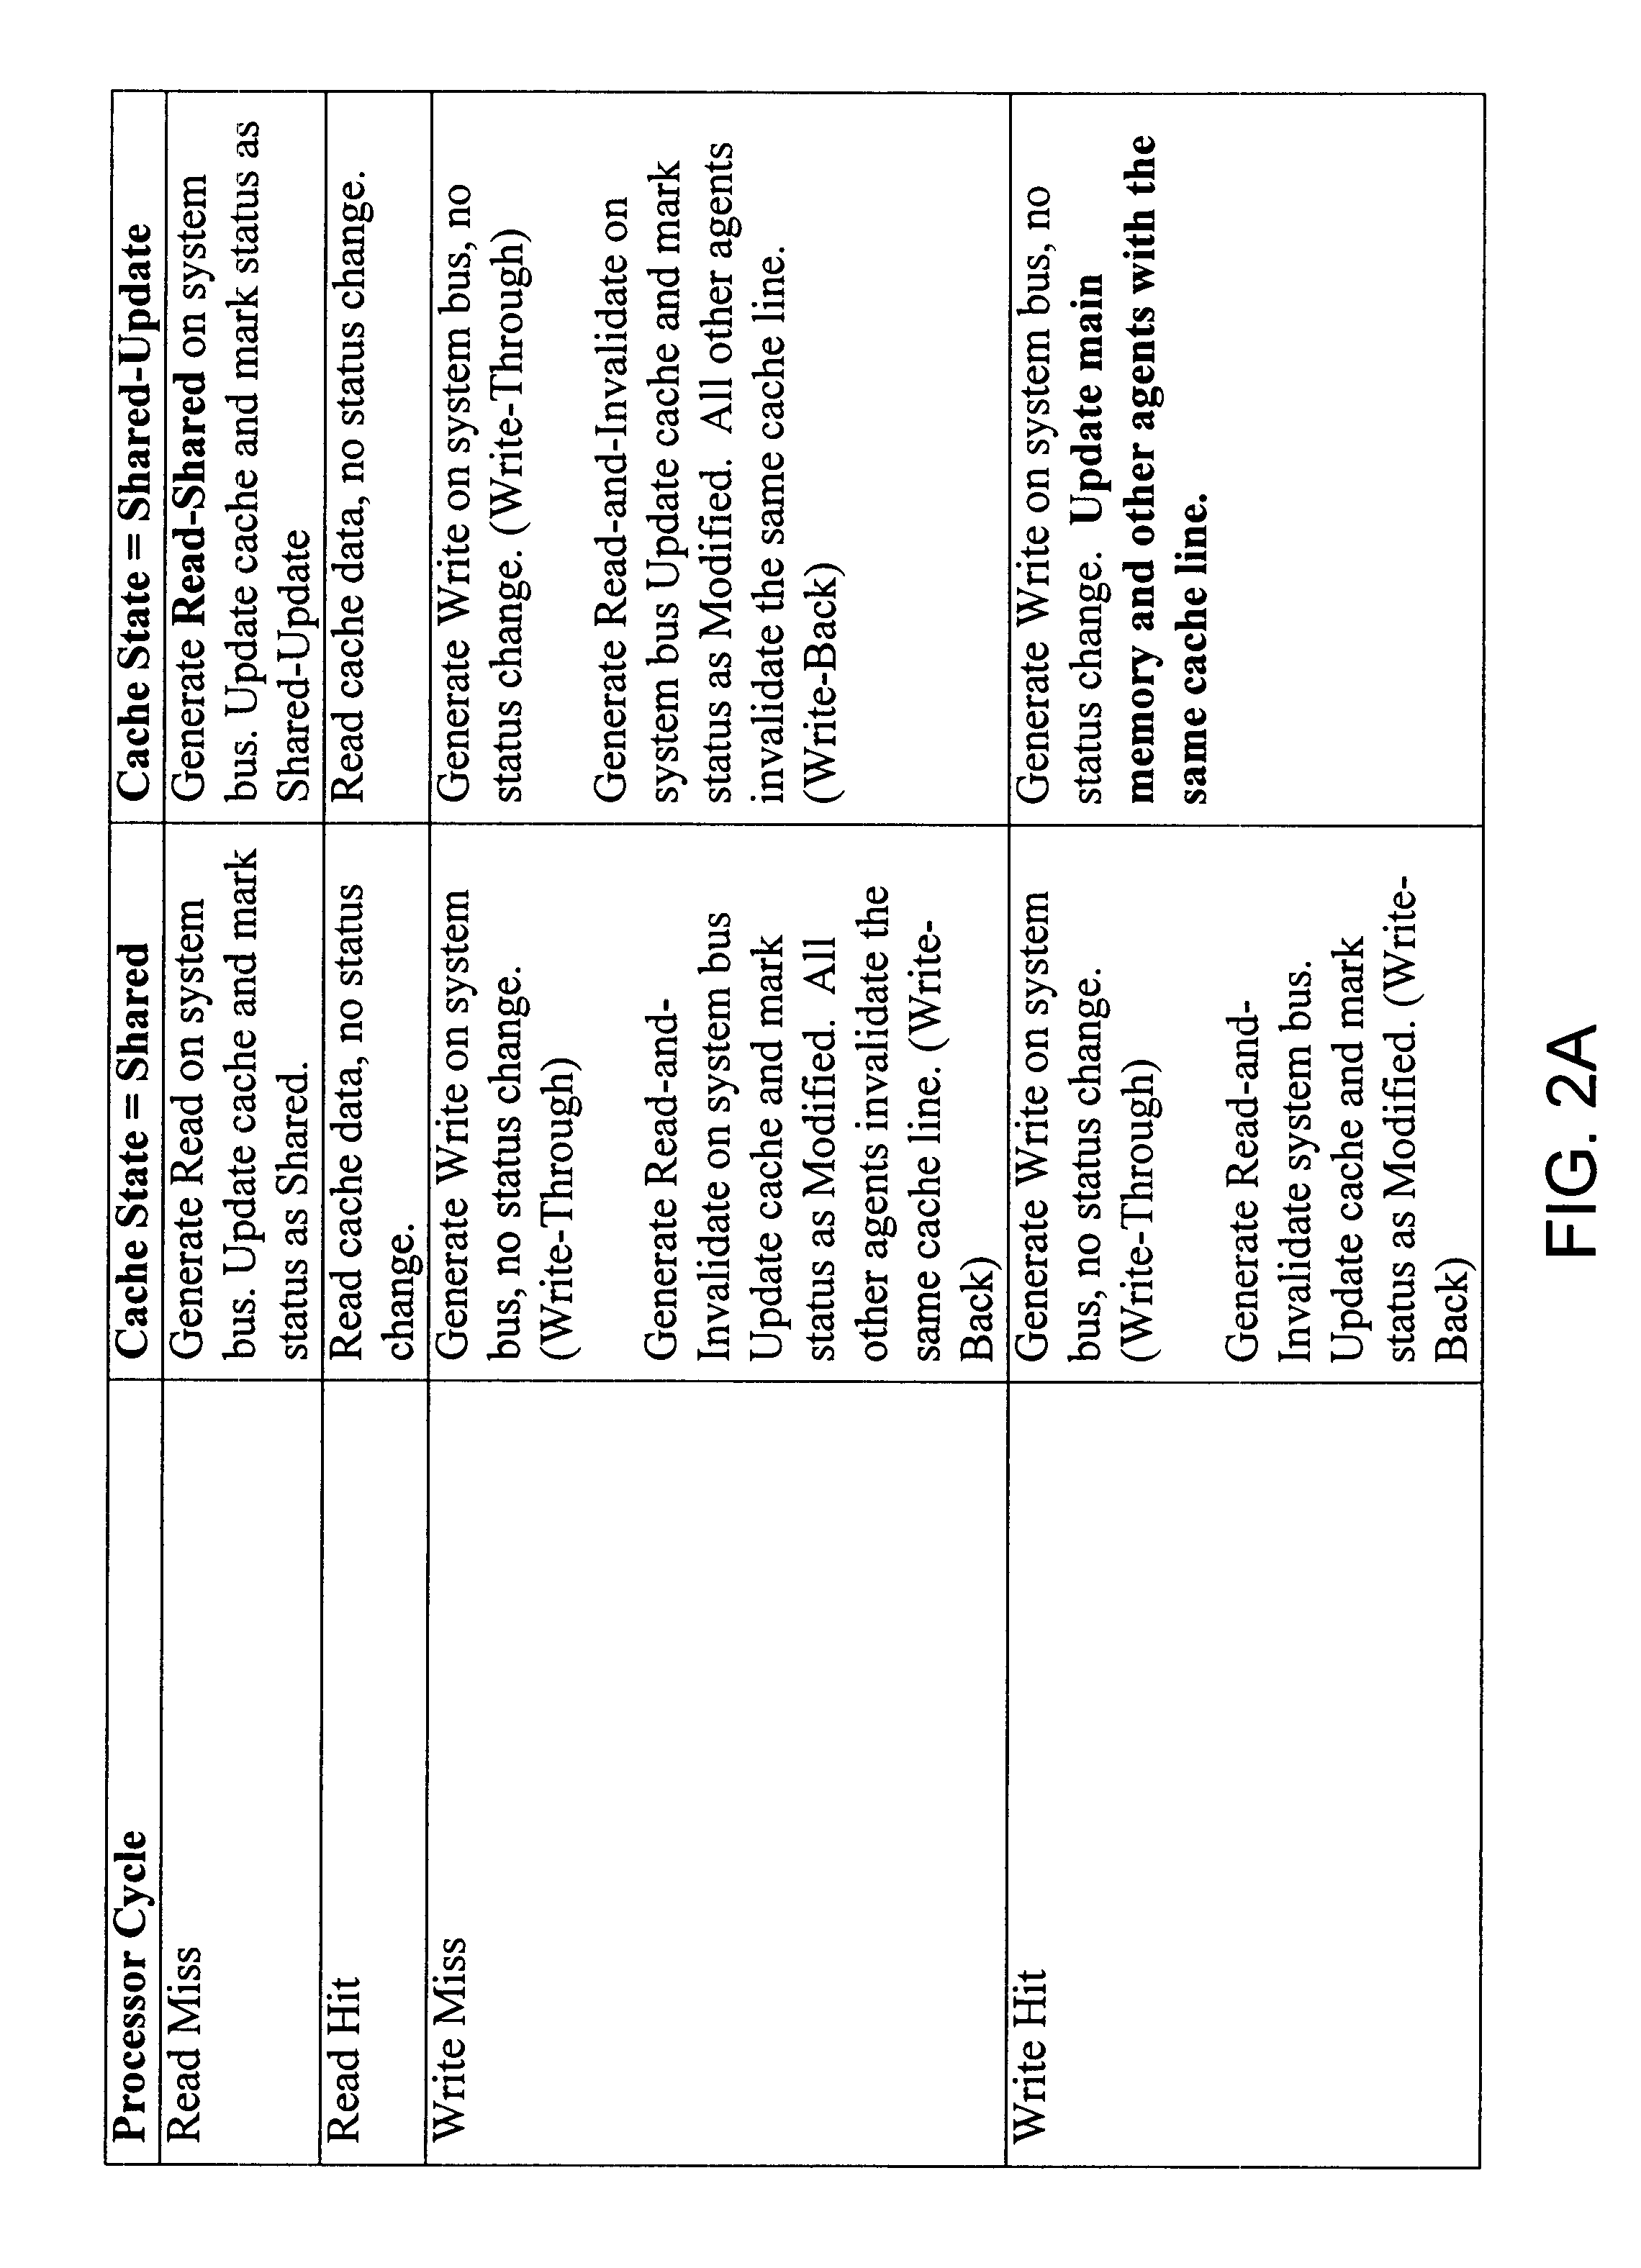 Cache states for multiprocessor cache coherency protocols